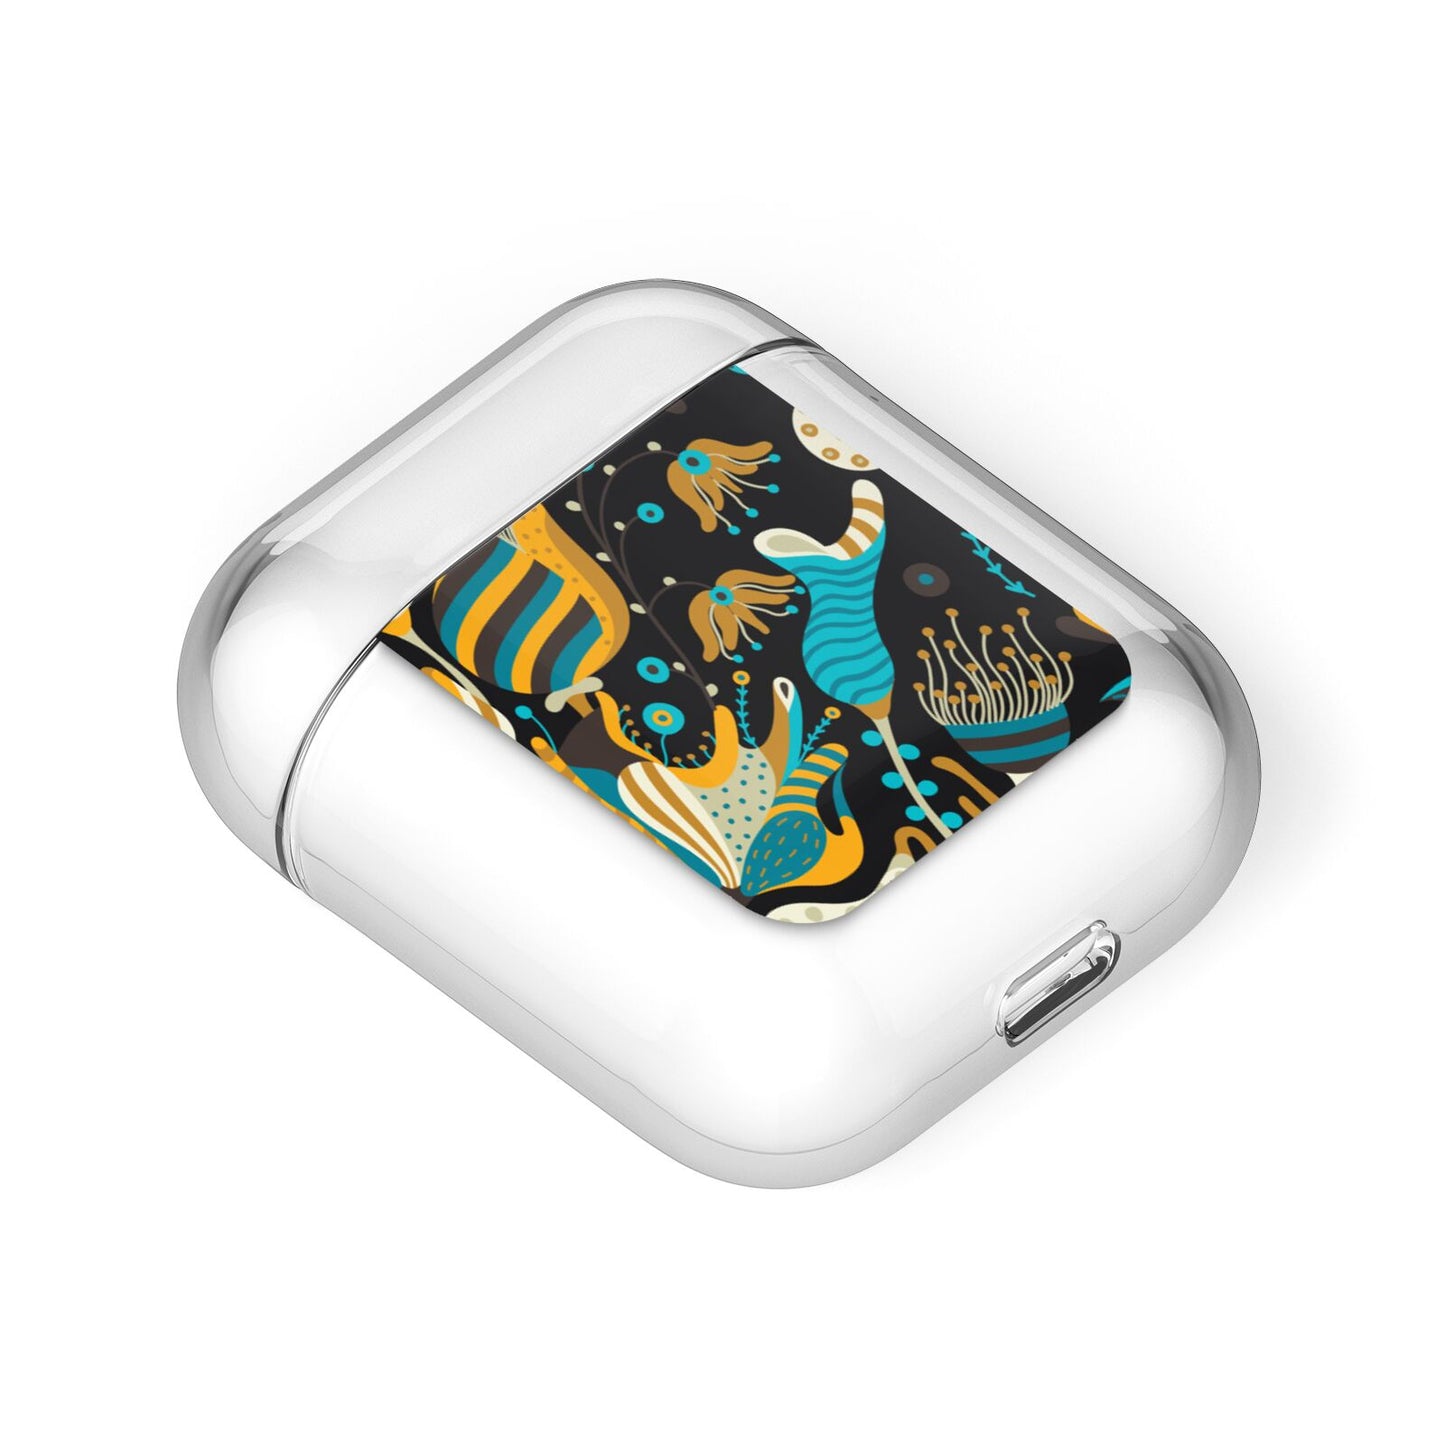 Colourful Floral AirPods Case Laid Flat